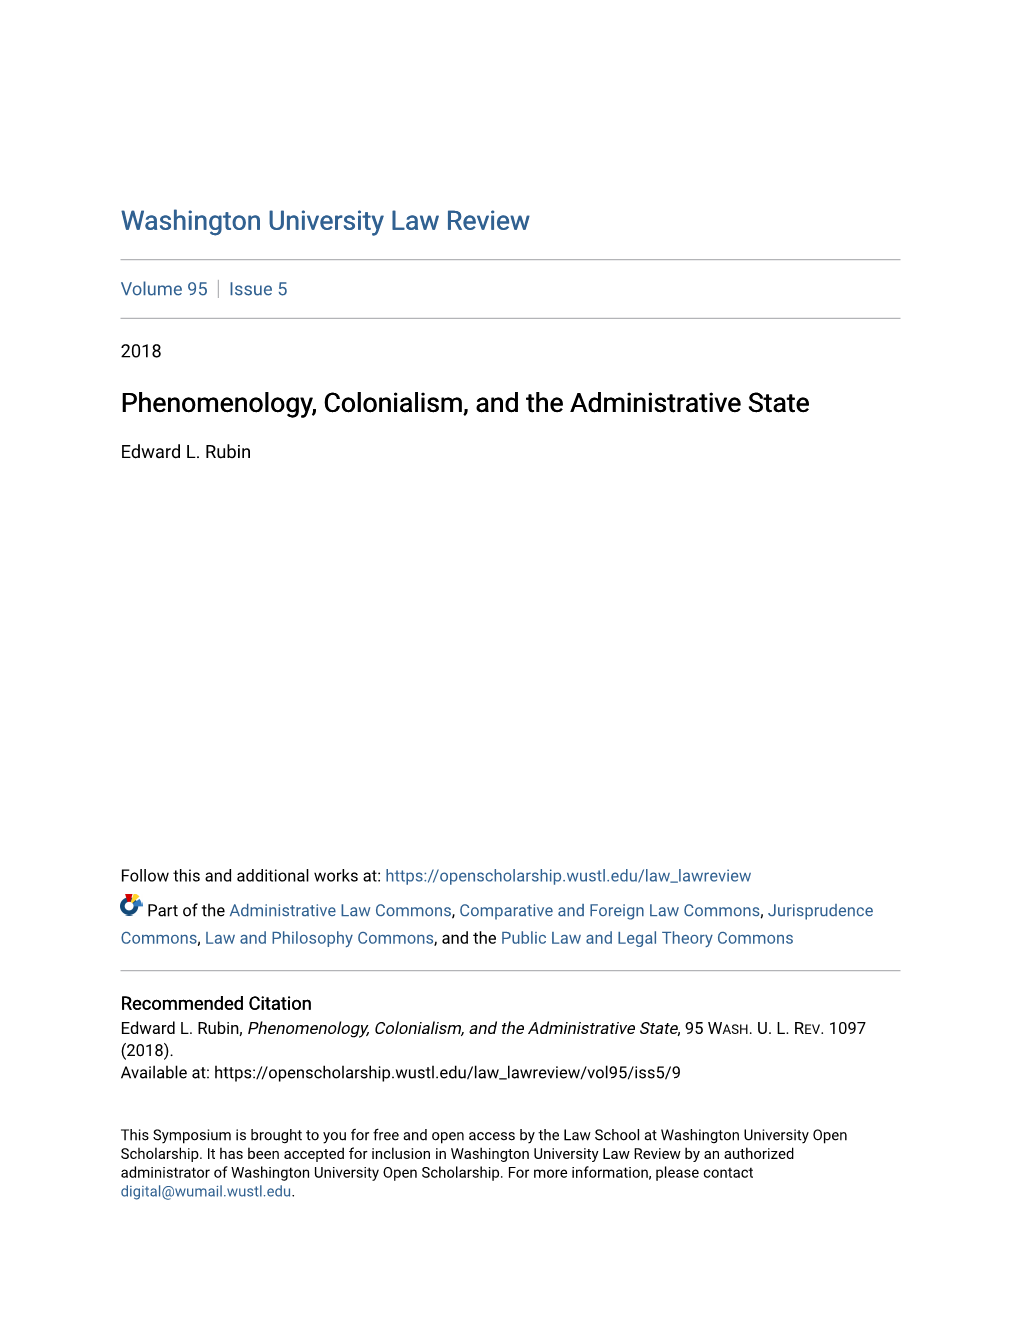 Phenomenology, Colonialism, and the Administrative State